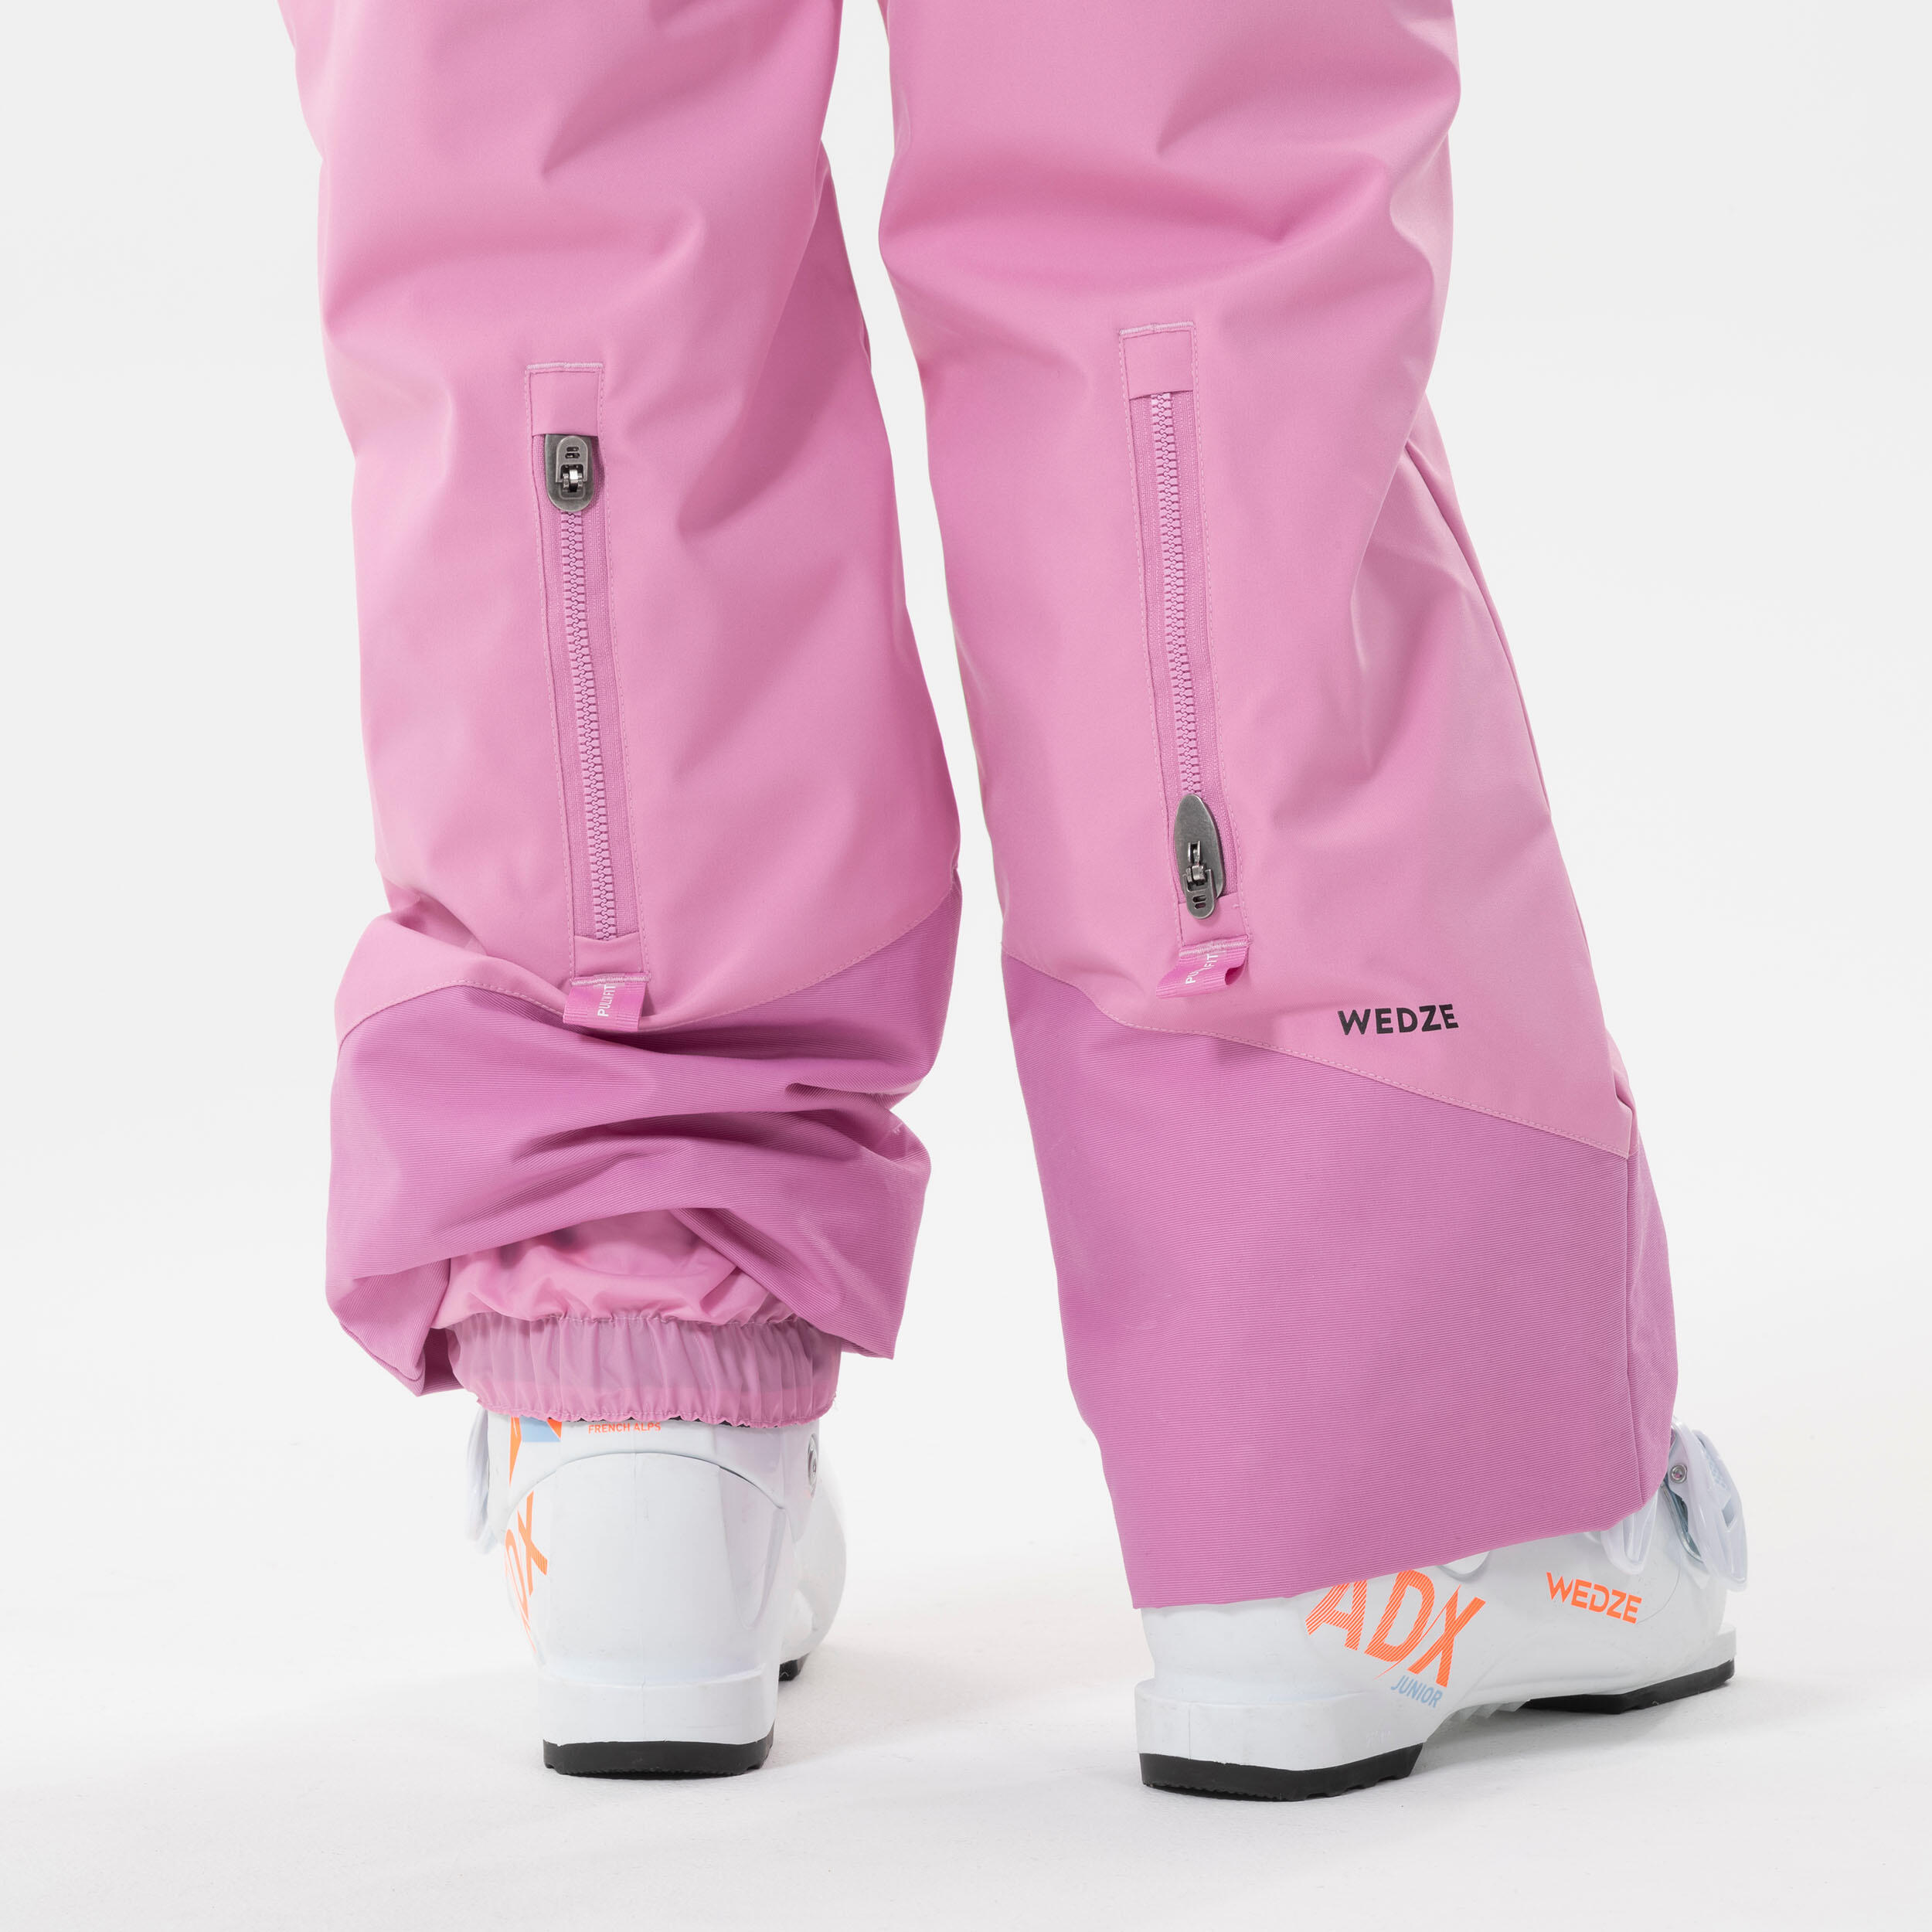 KIDS’ WARM AND WATERPROOF SKI TROUSERS  - 500 PNF - PINK  8/12